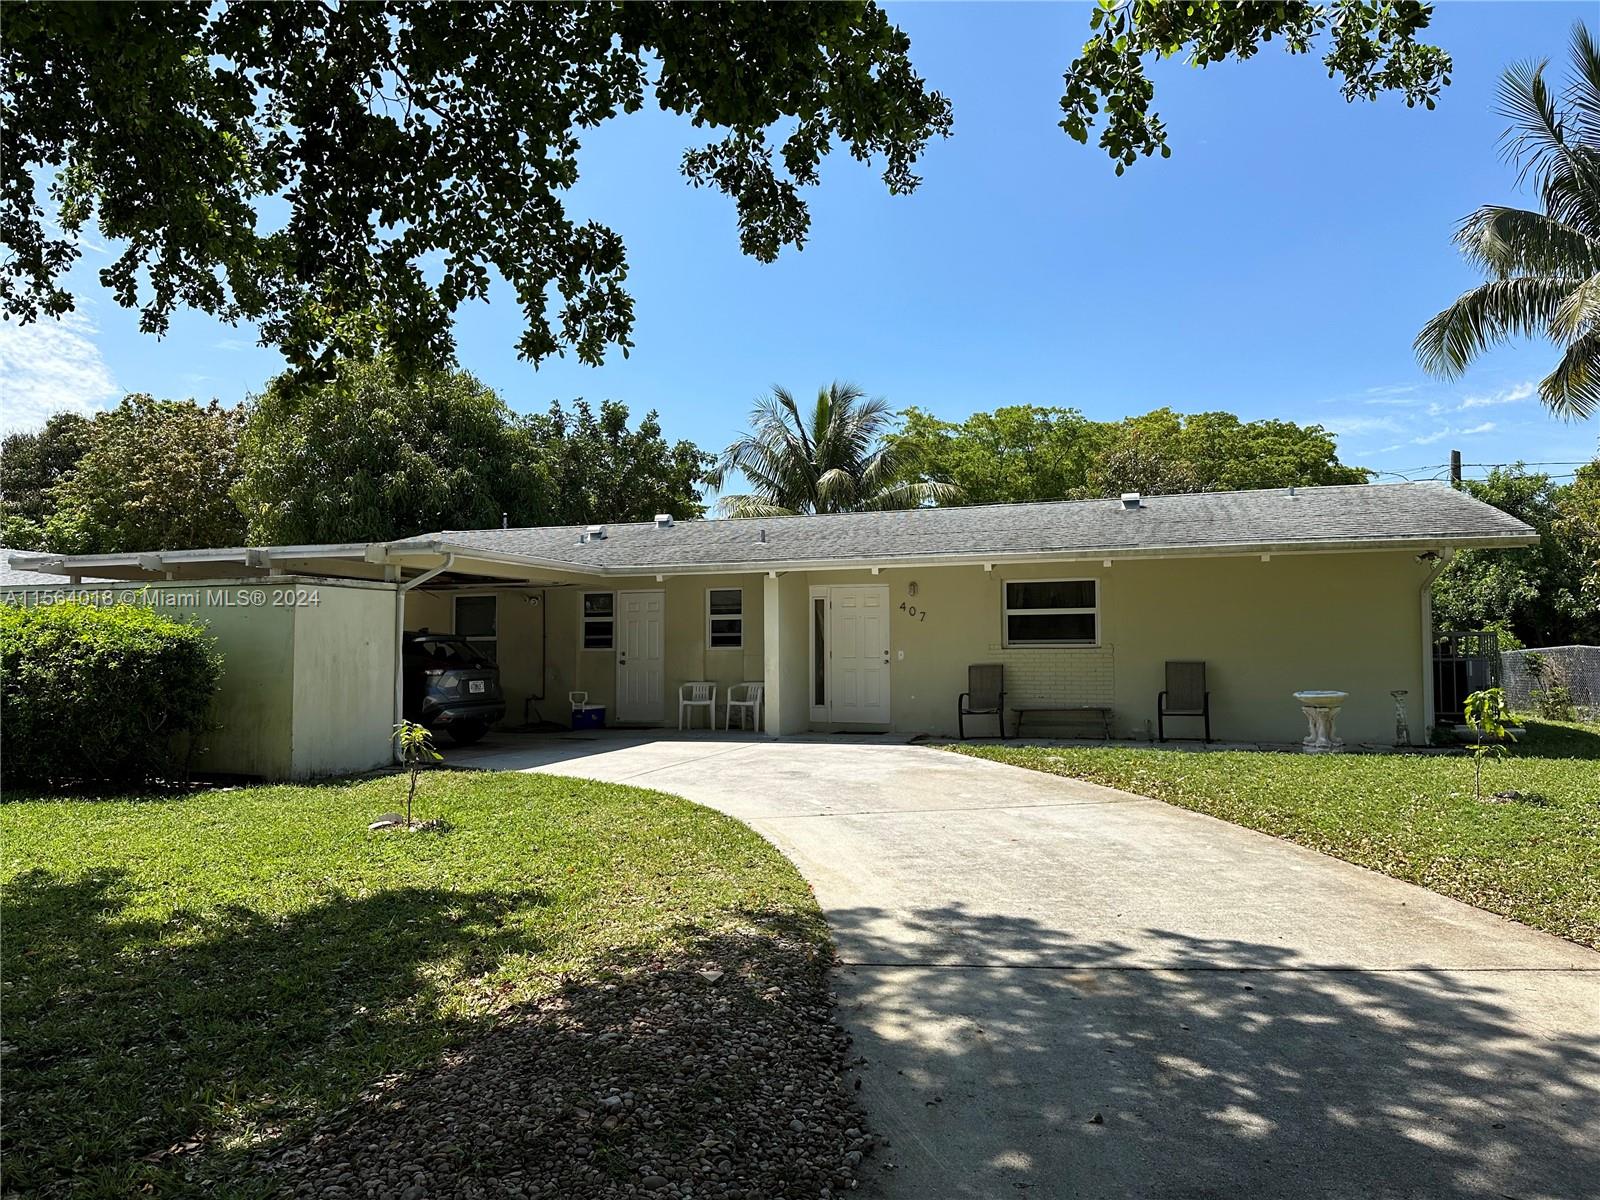 Property for Sale at 407 Ontario Pl Pl, West Palm Beach, Palm Beach County, Florida - Bedrooms: 4 
Bathrooms: 2  - $450,000